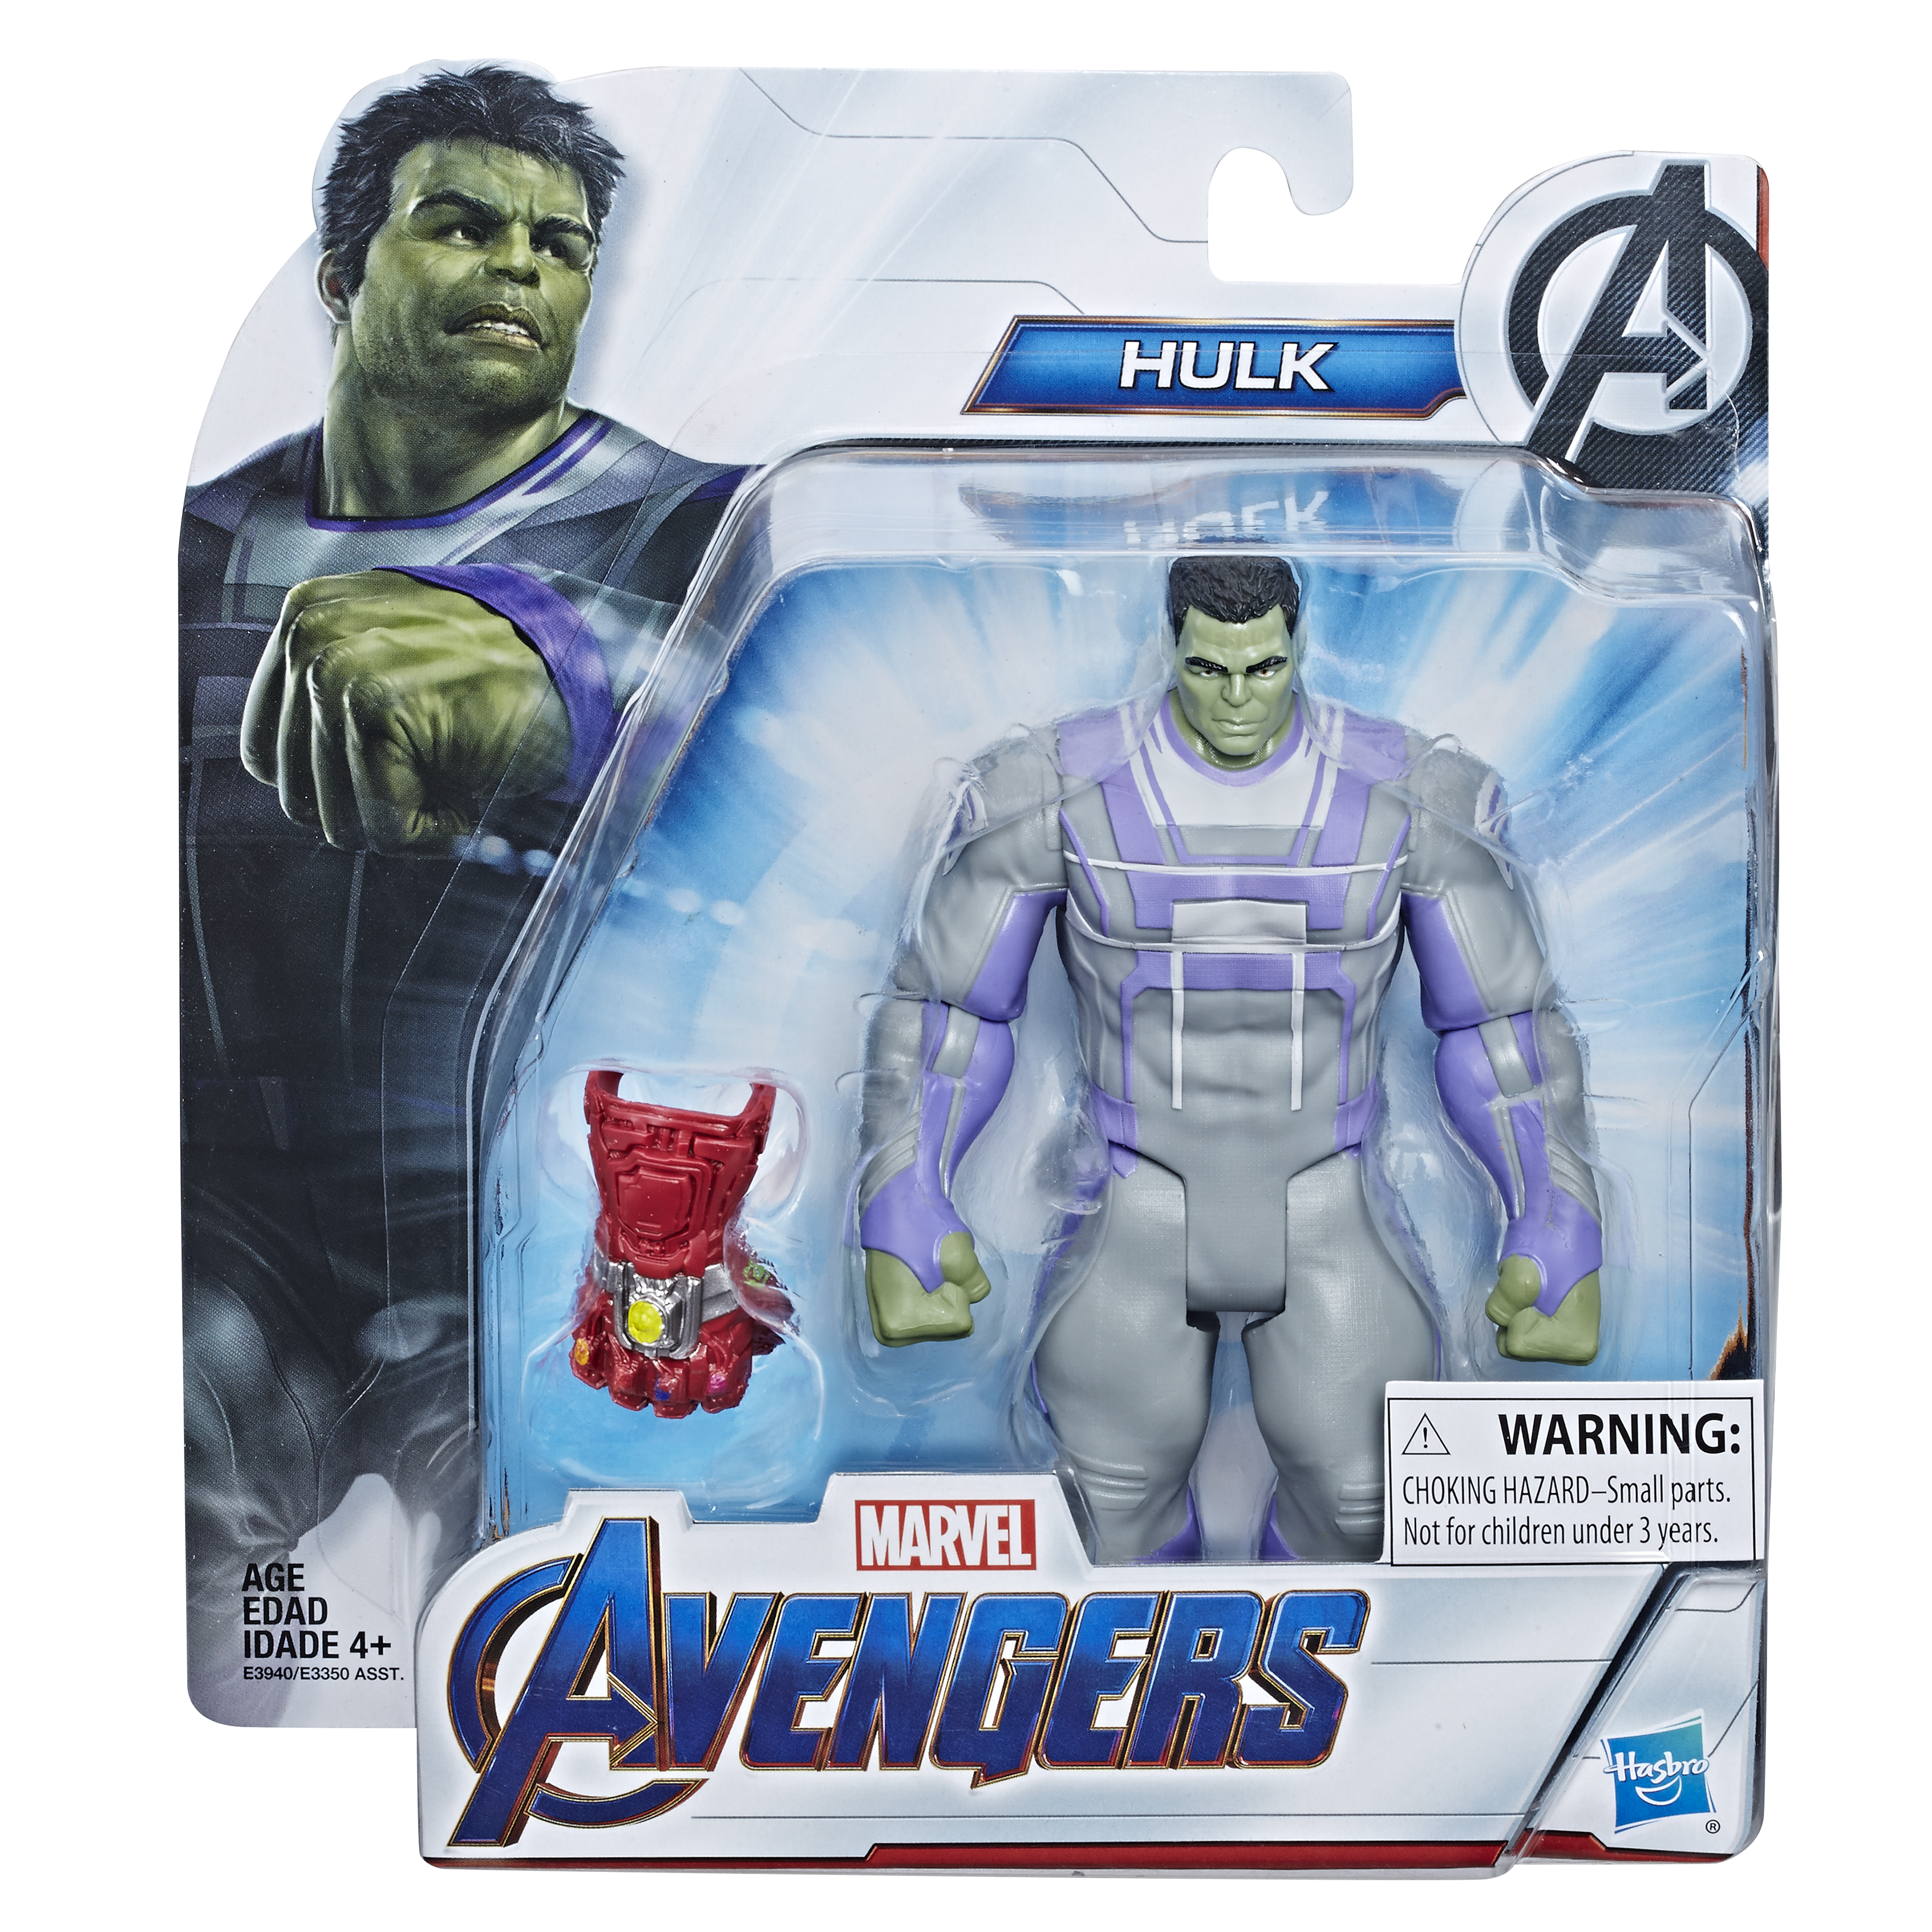 6-inch Hulk with gauntlet carded